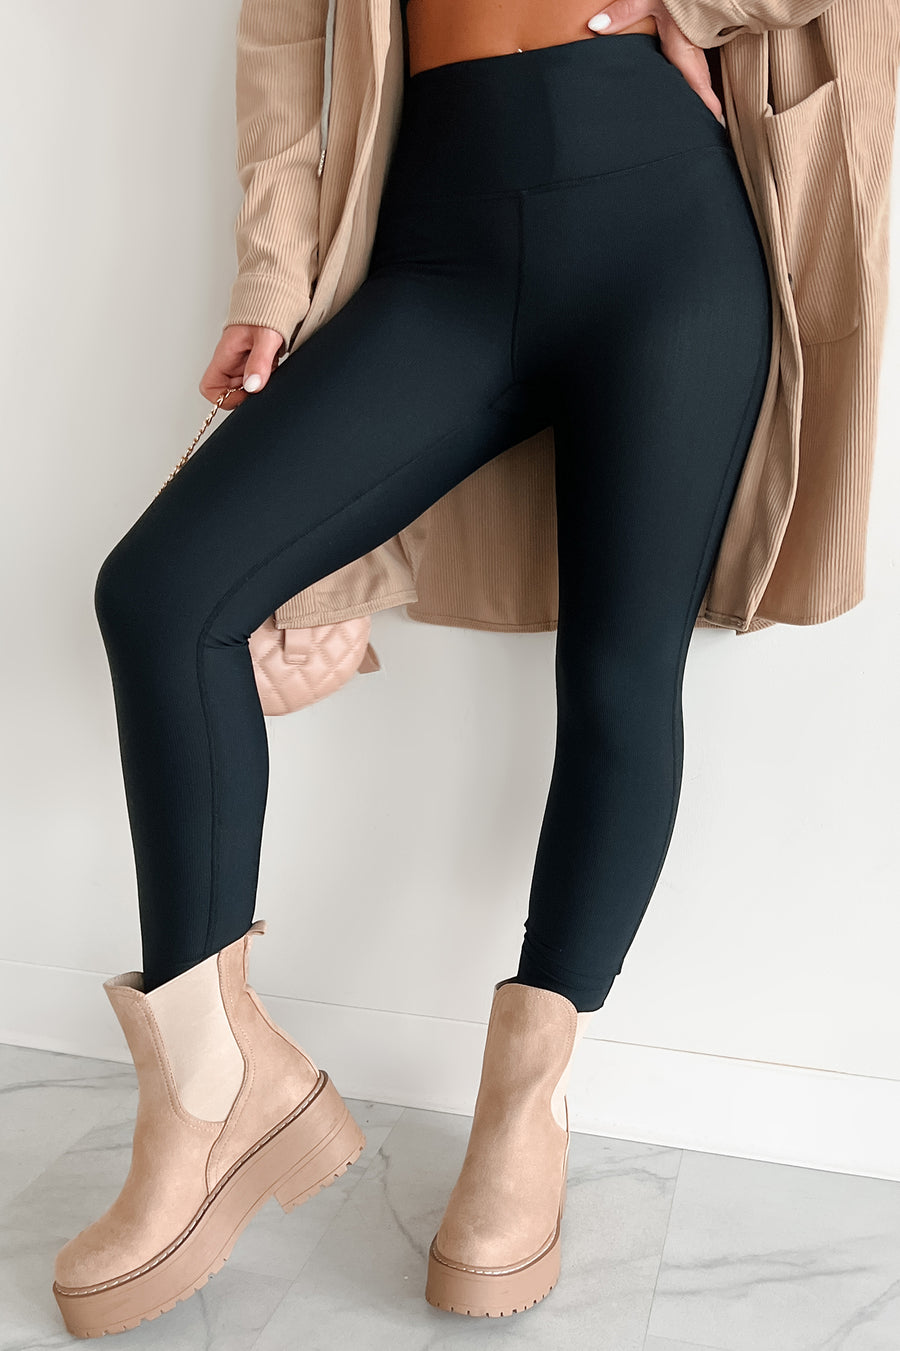 Out Here Lifting Weights Two Piece Legging Set (Beige)